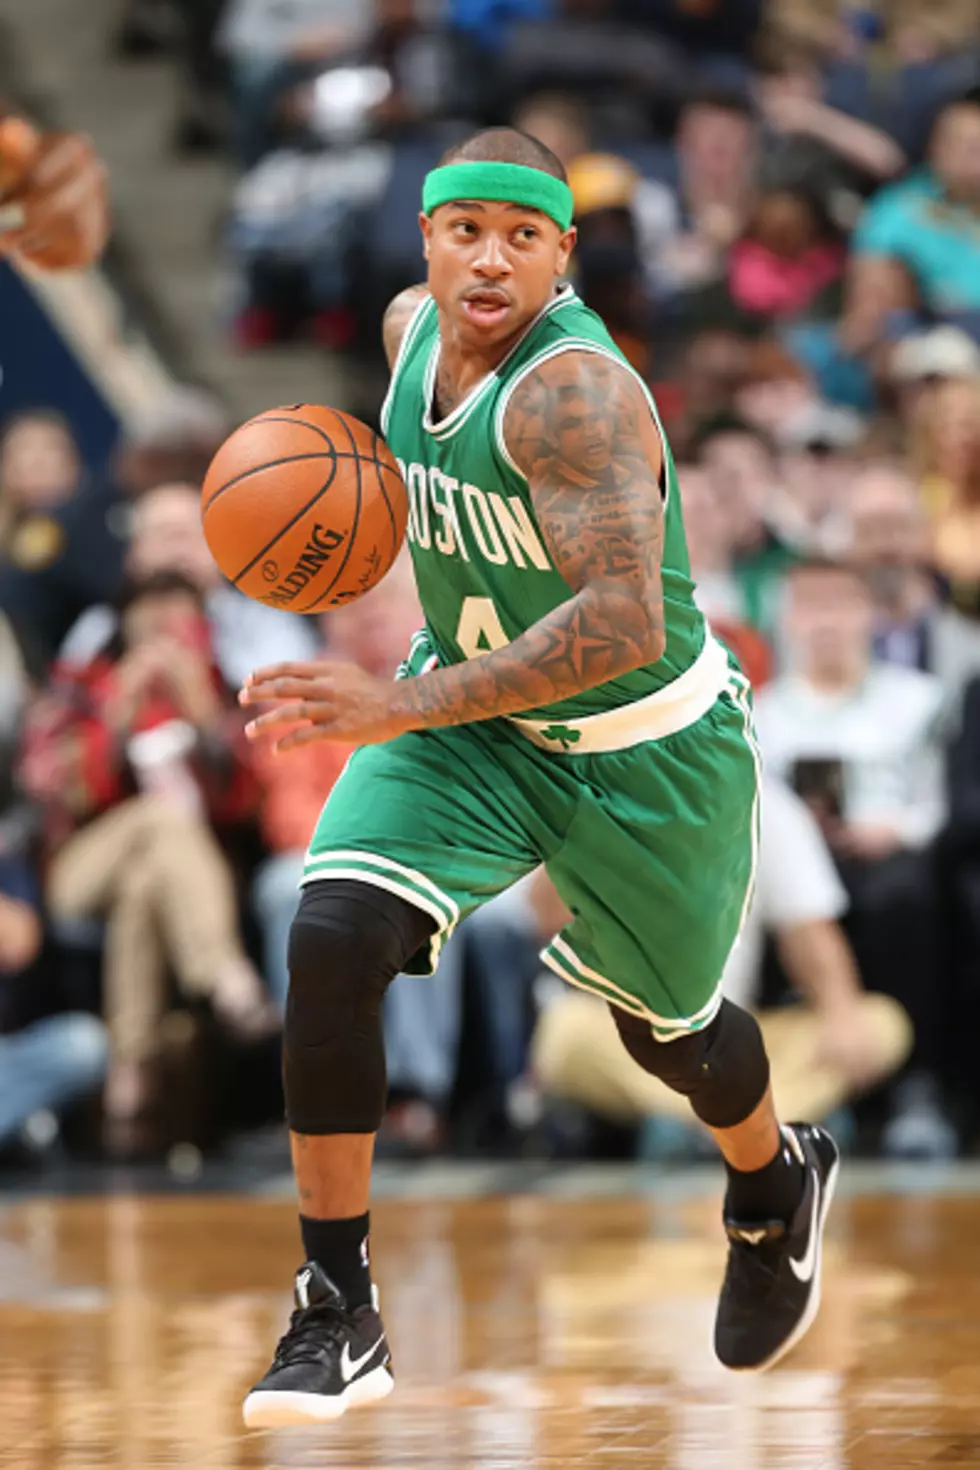 Thomas Gets Career High 44 In C’s Win [VIDEO]